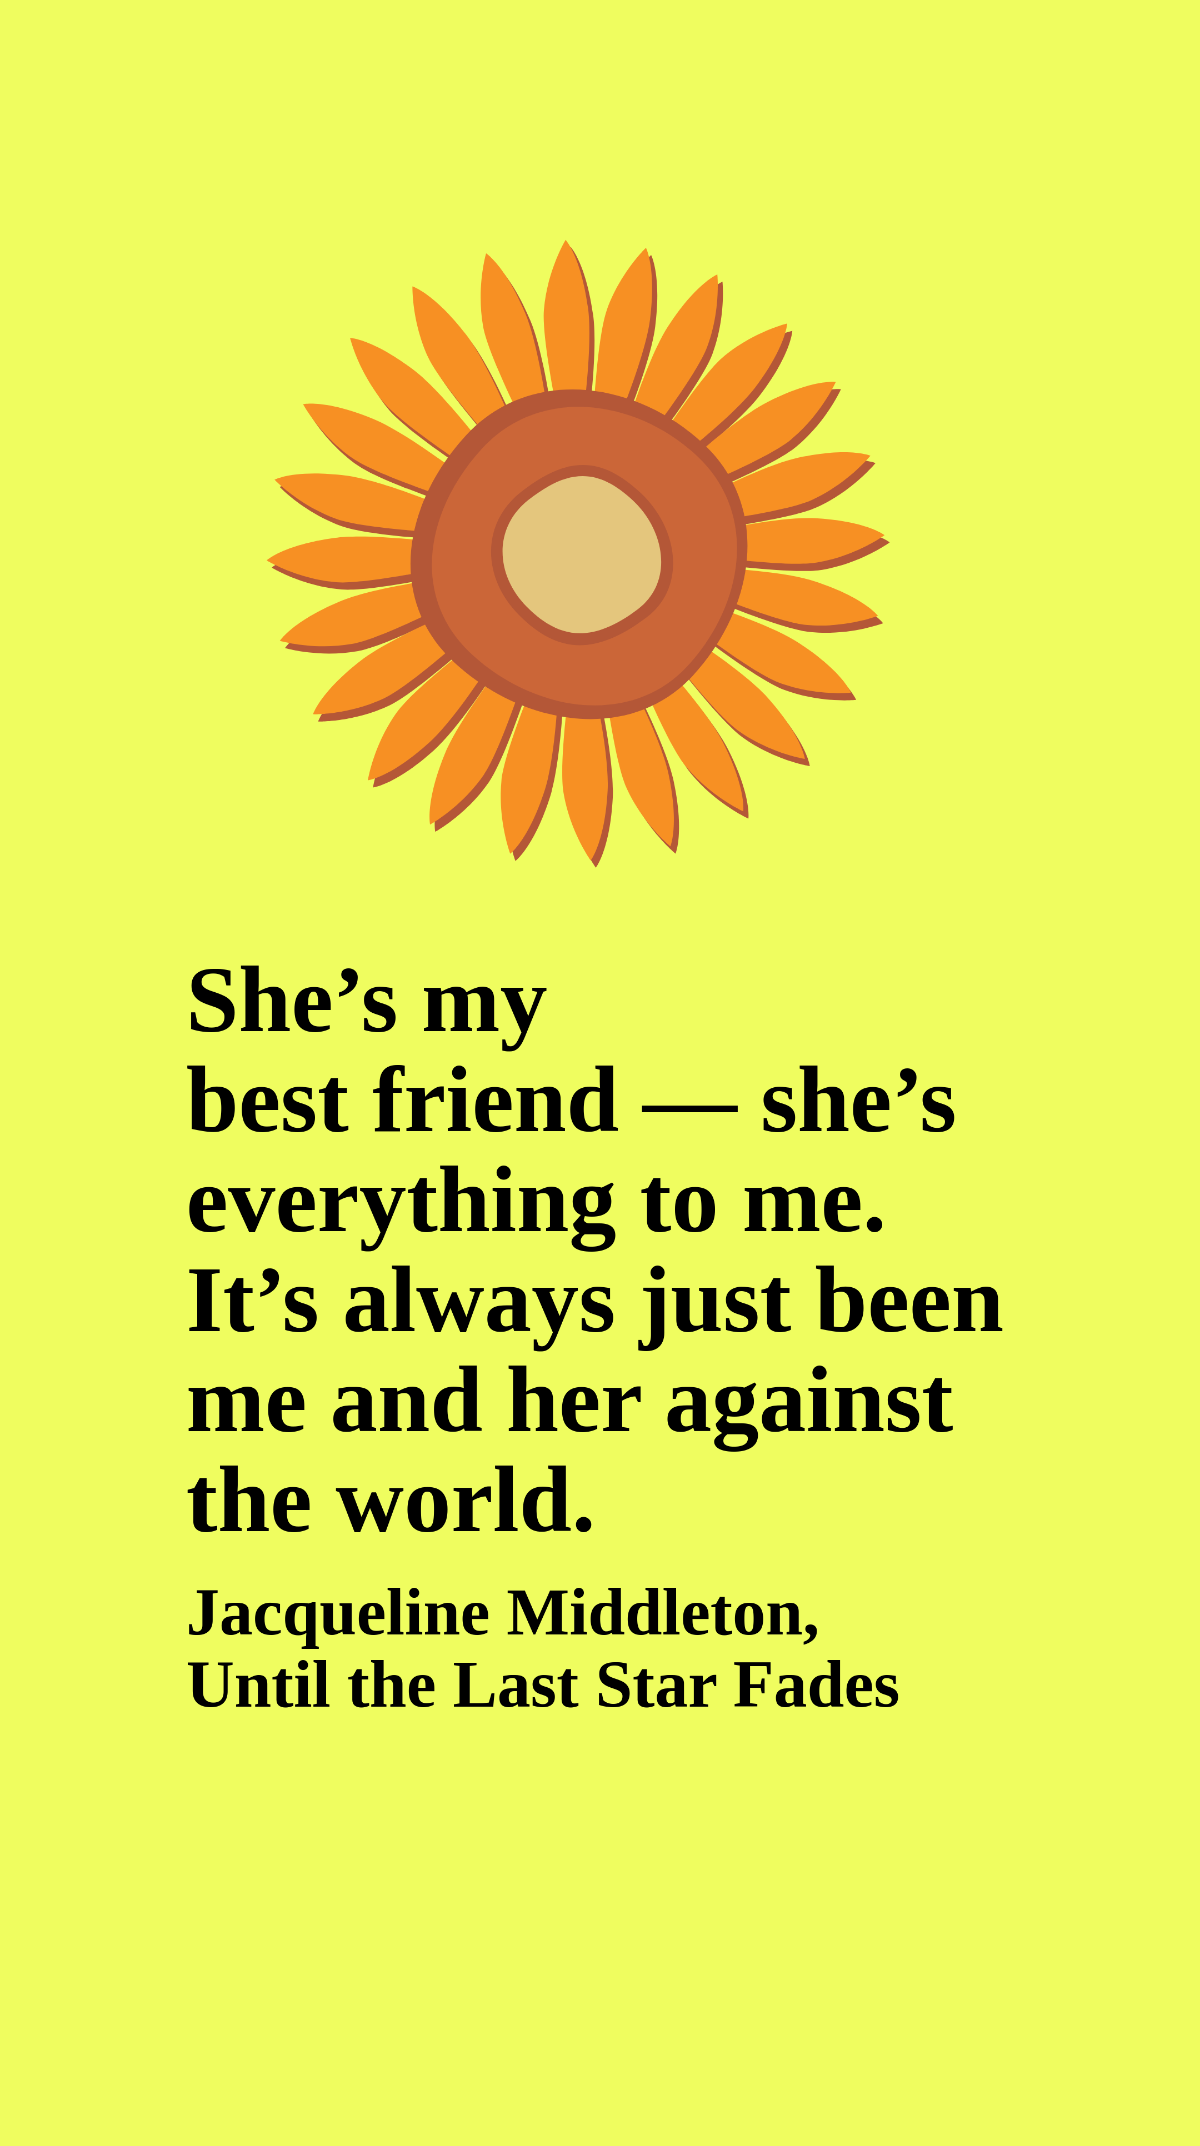 Free Jacqueline Middleton, Until the Last Star Fades - She’s my best friend — she’s everything to me. It’s always just been me and her against the world. Template